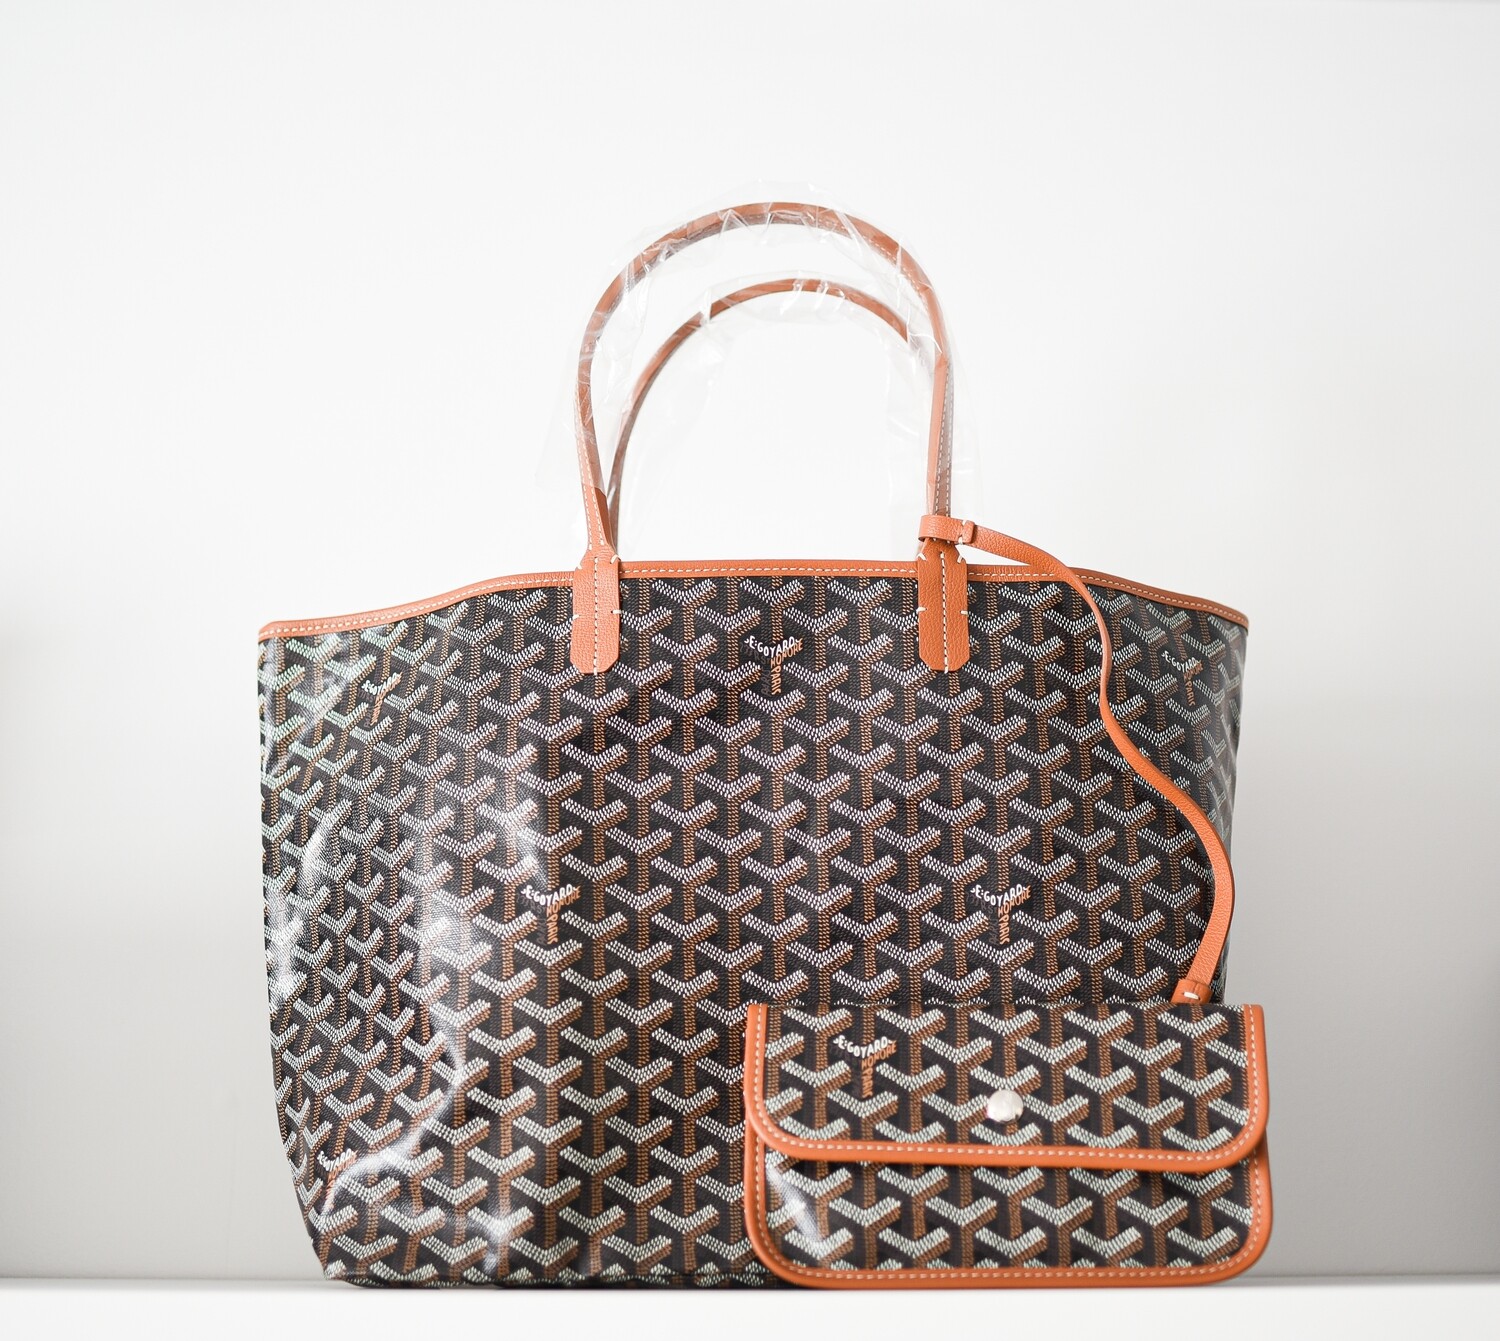 Goyard St. Louis PM Tote Black with Brown Trim, New in Dustbag